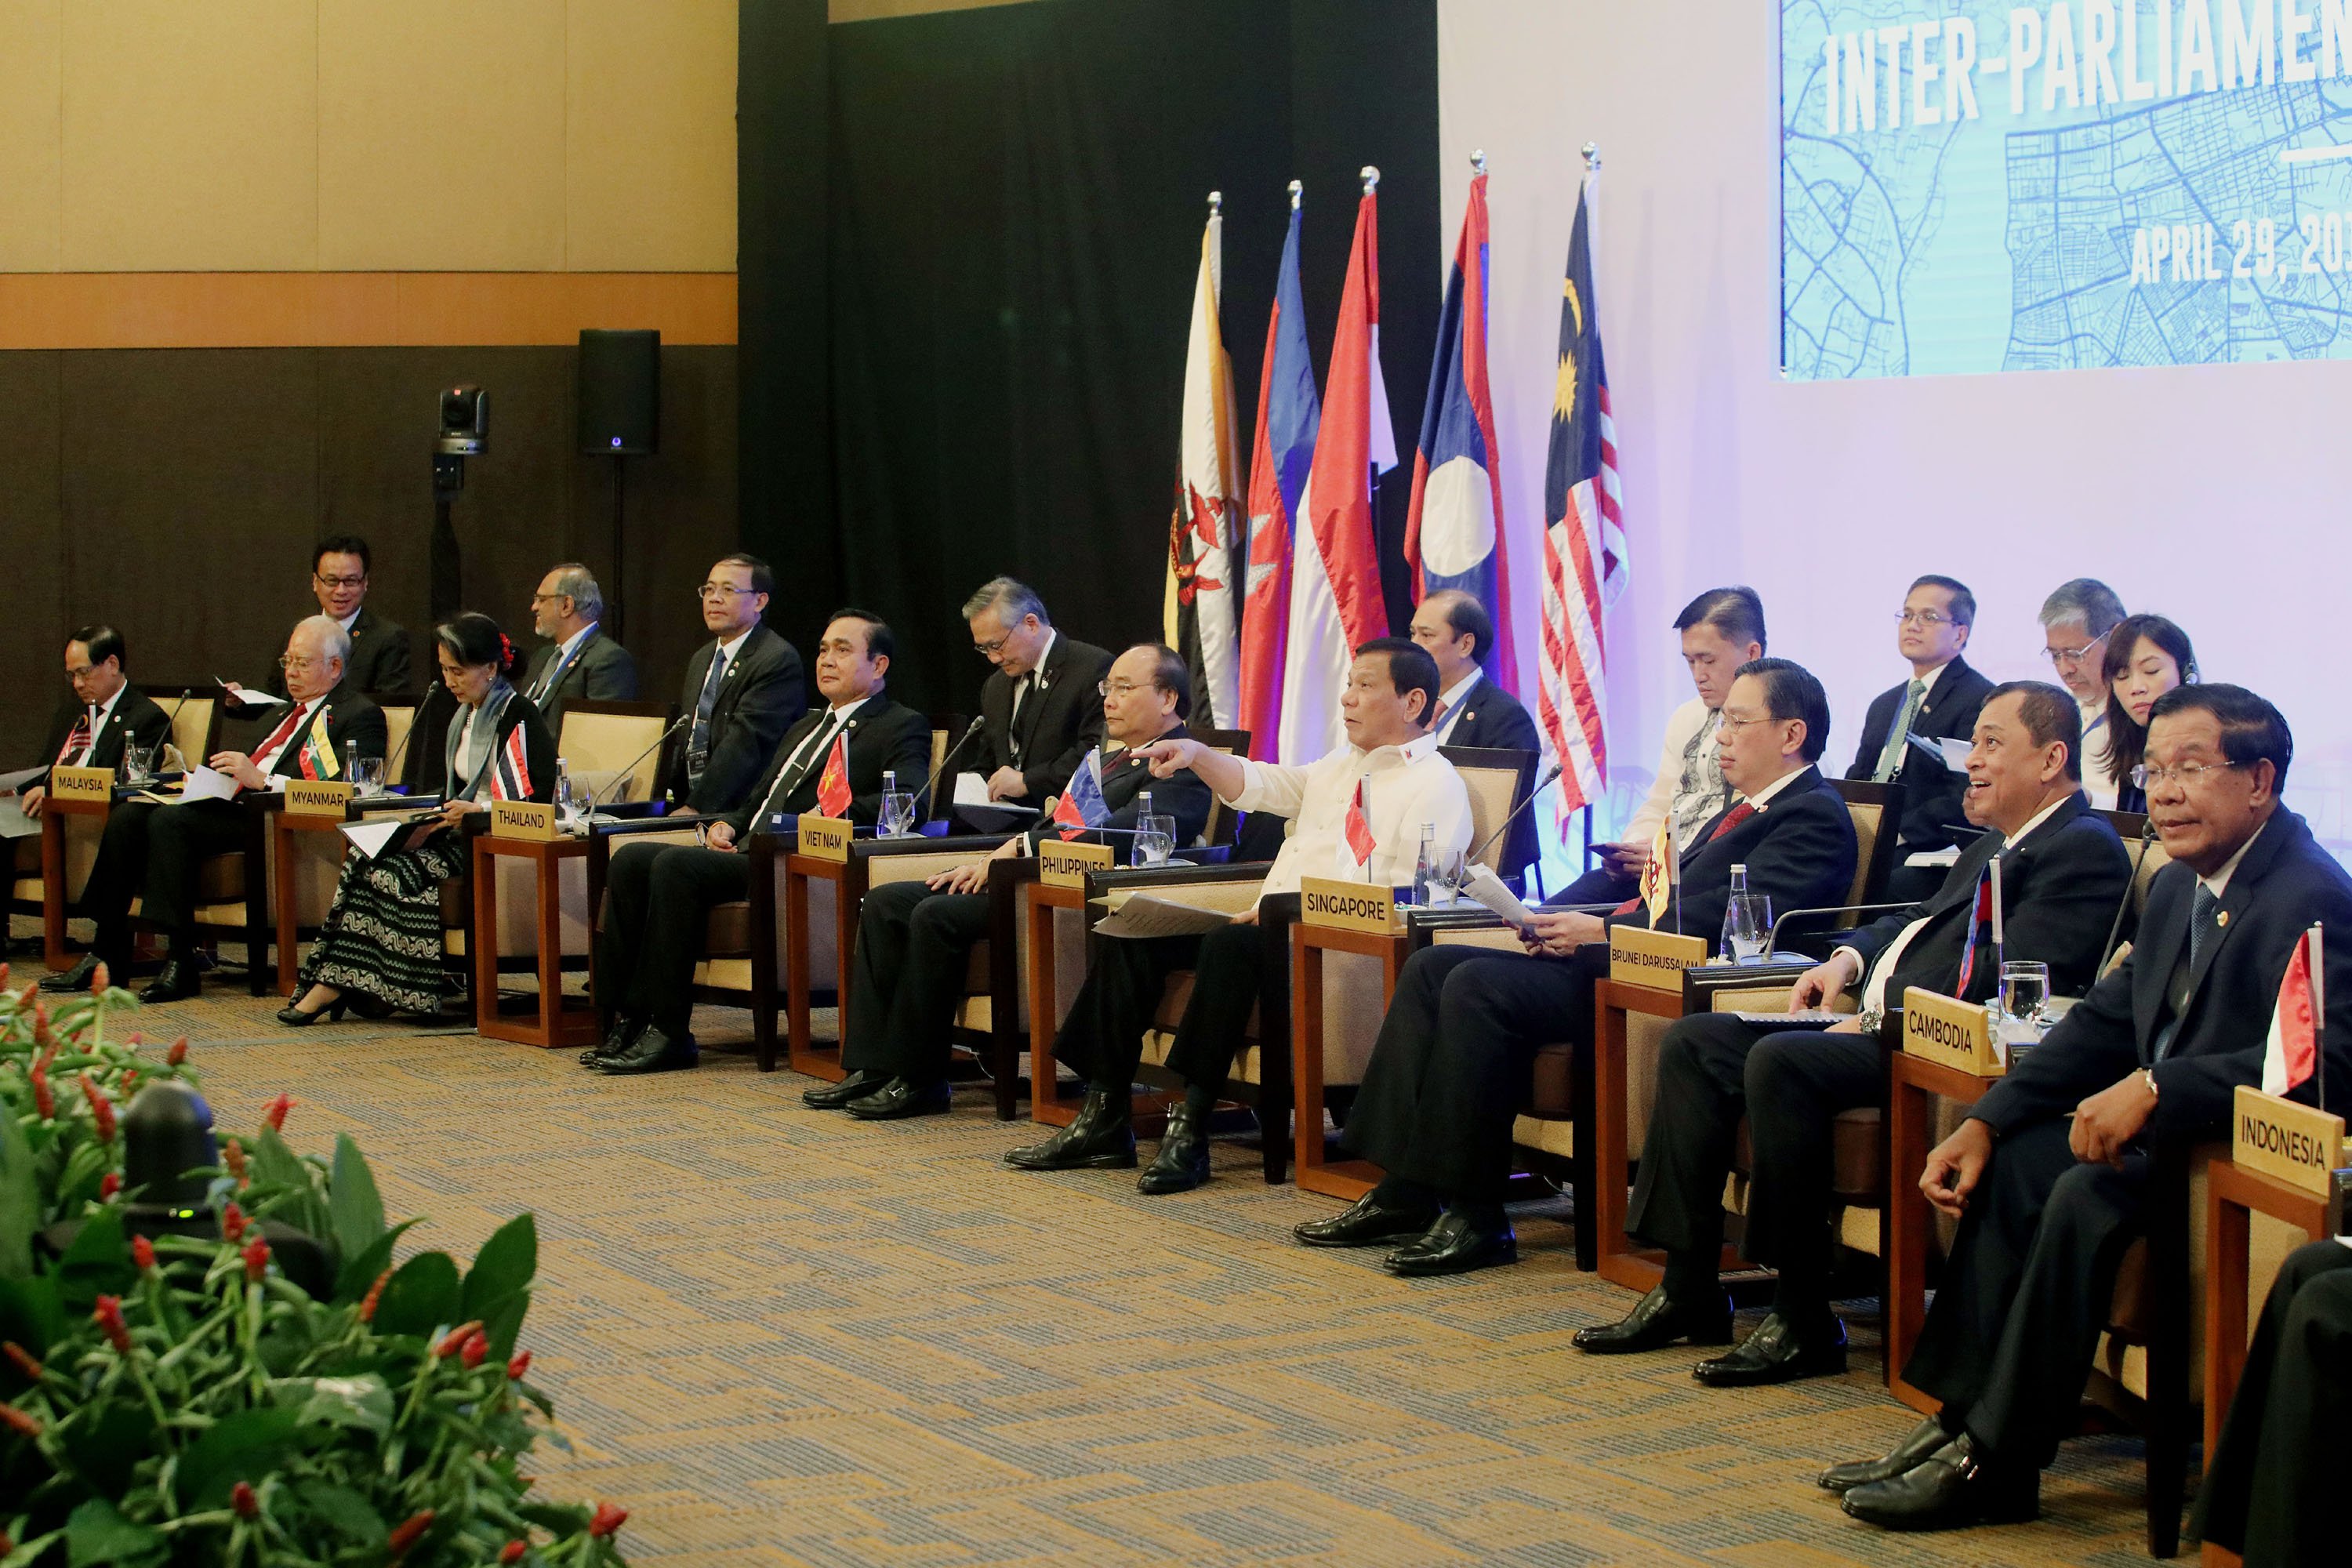 ASEAN Interface with representatives of ASEAN Inter-Parliamentary Assembly